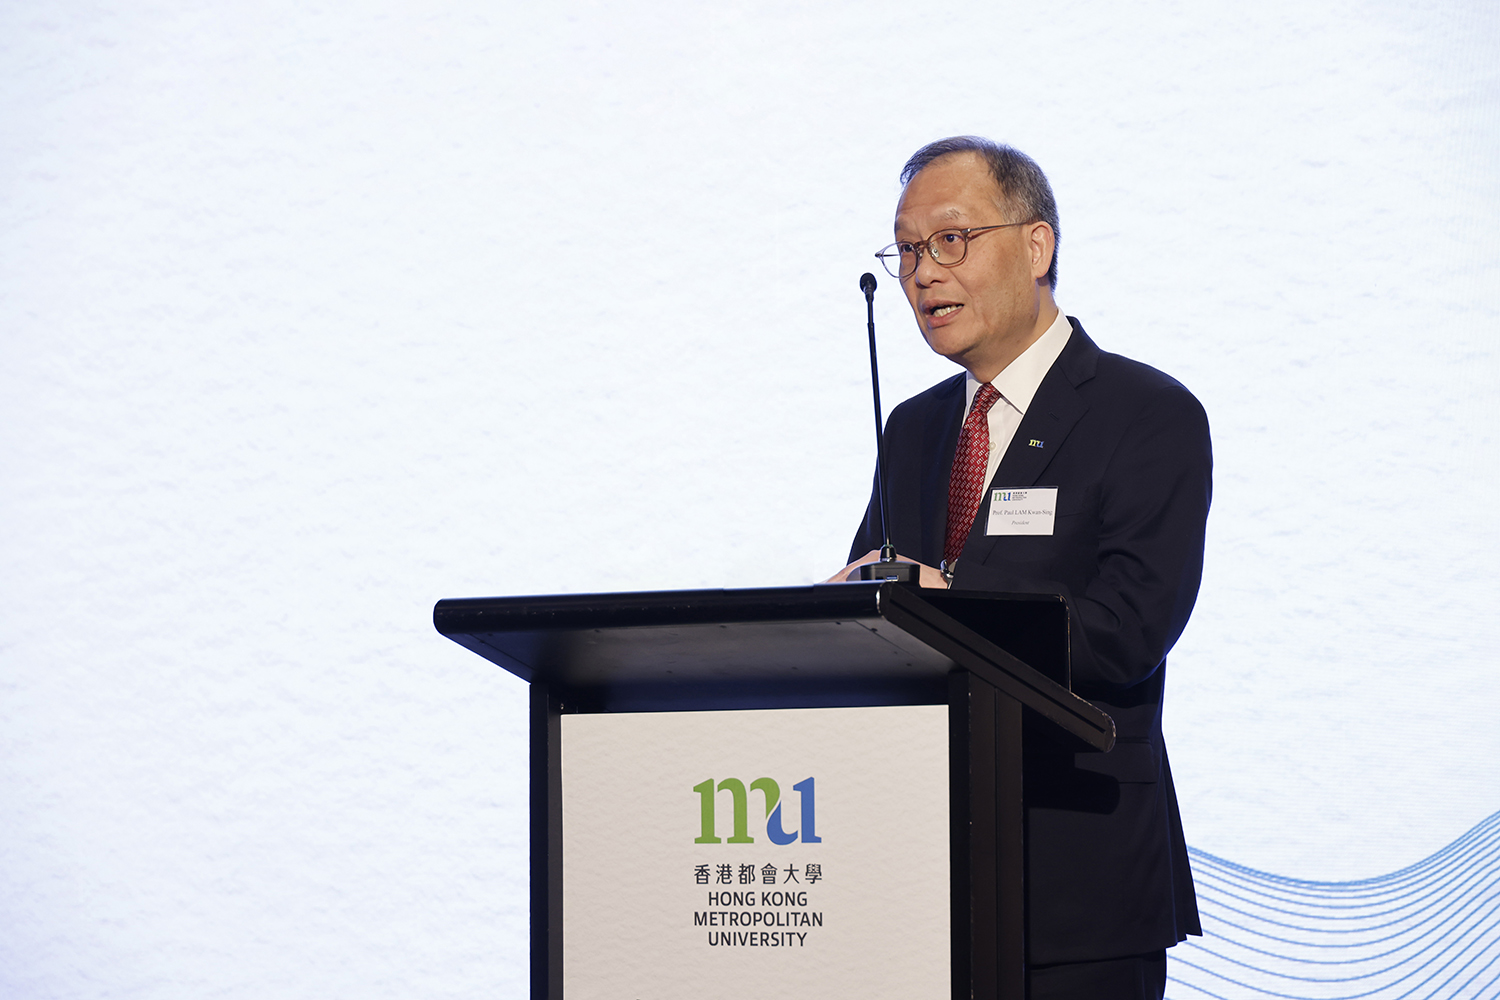 HKMU President Prof. Paul Lam Kwan-sing says that the University will draw on the experience of many successful “Universities of Applied Sciences” in Europe to play an important role in nurturing talent for Hong Kong.